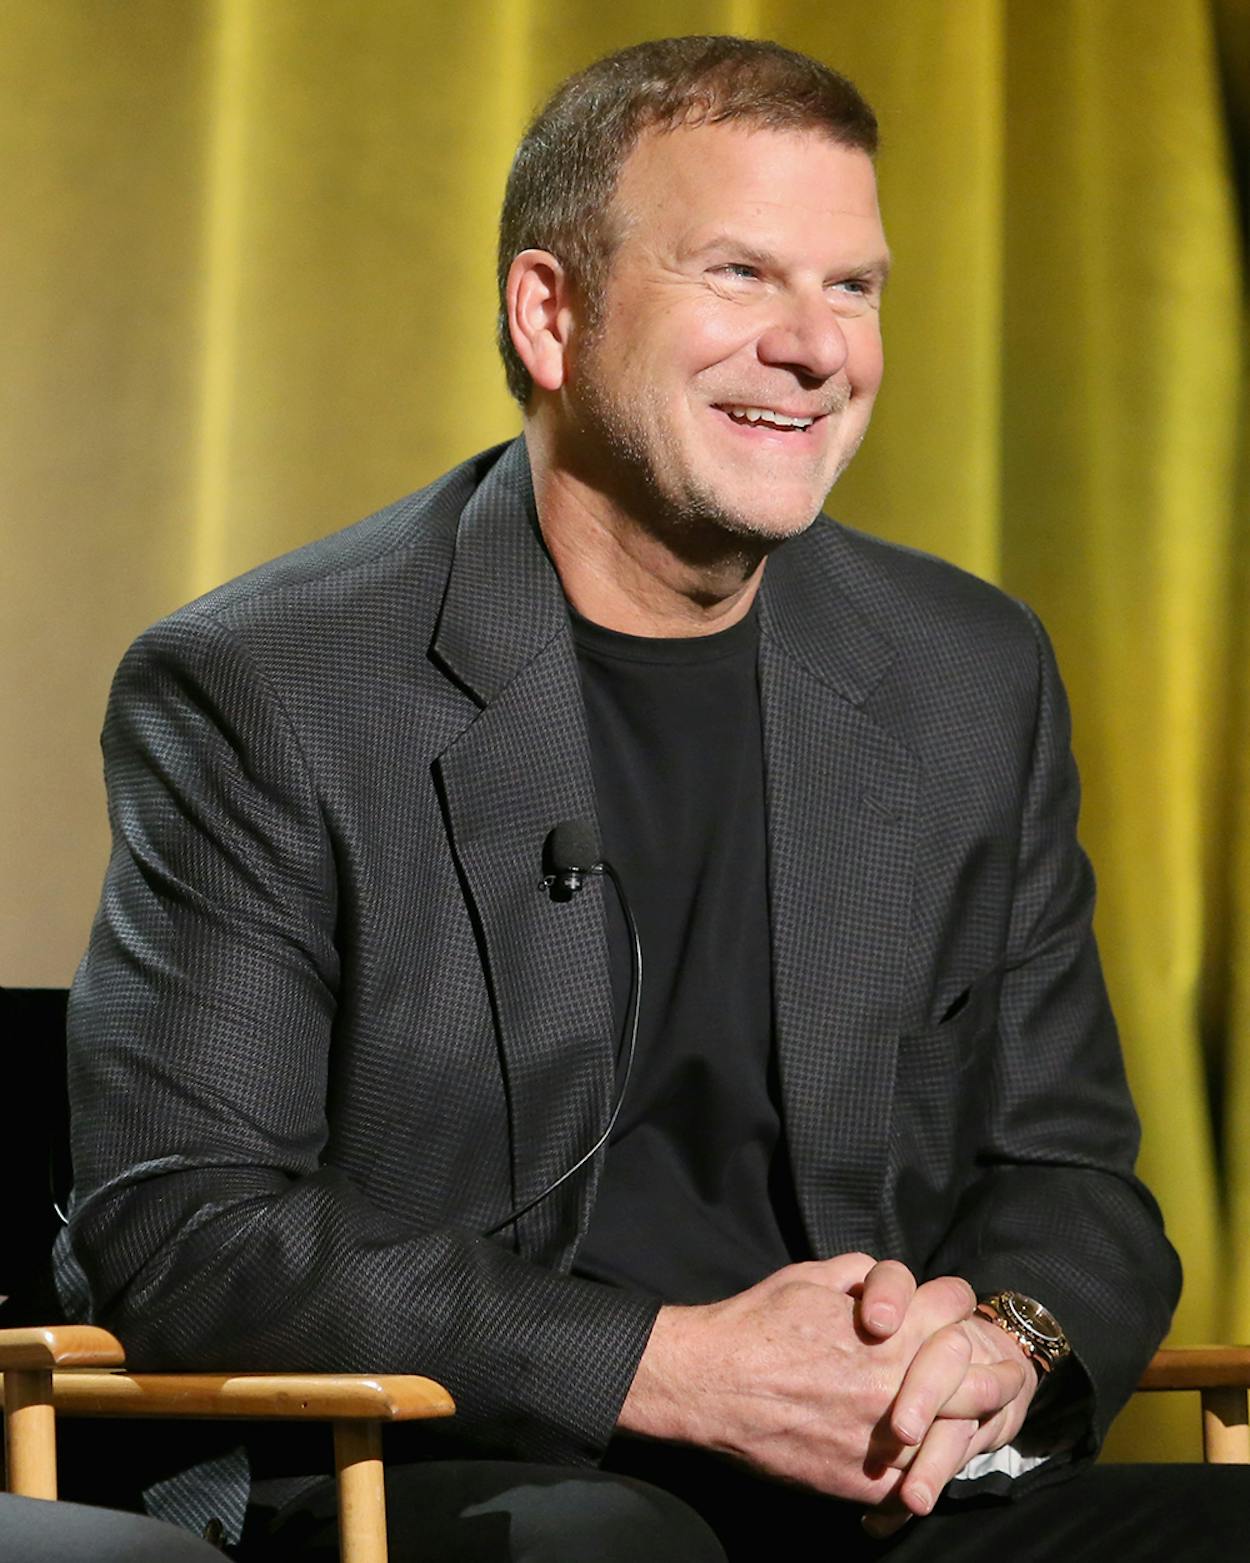 Businessman/TV personality Tilman J. Fertitta speaks onstage during the 2016 NBCUniversal Summer Press Day on April 1, 2016 in Westlake Village, California.